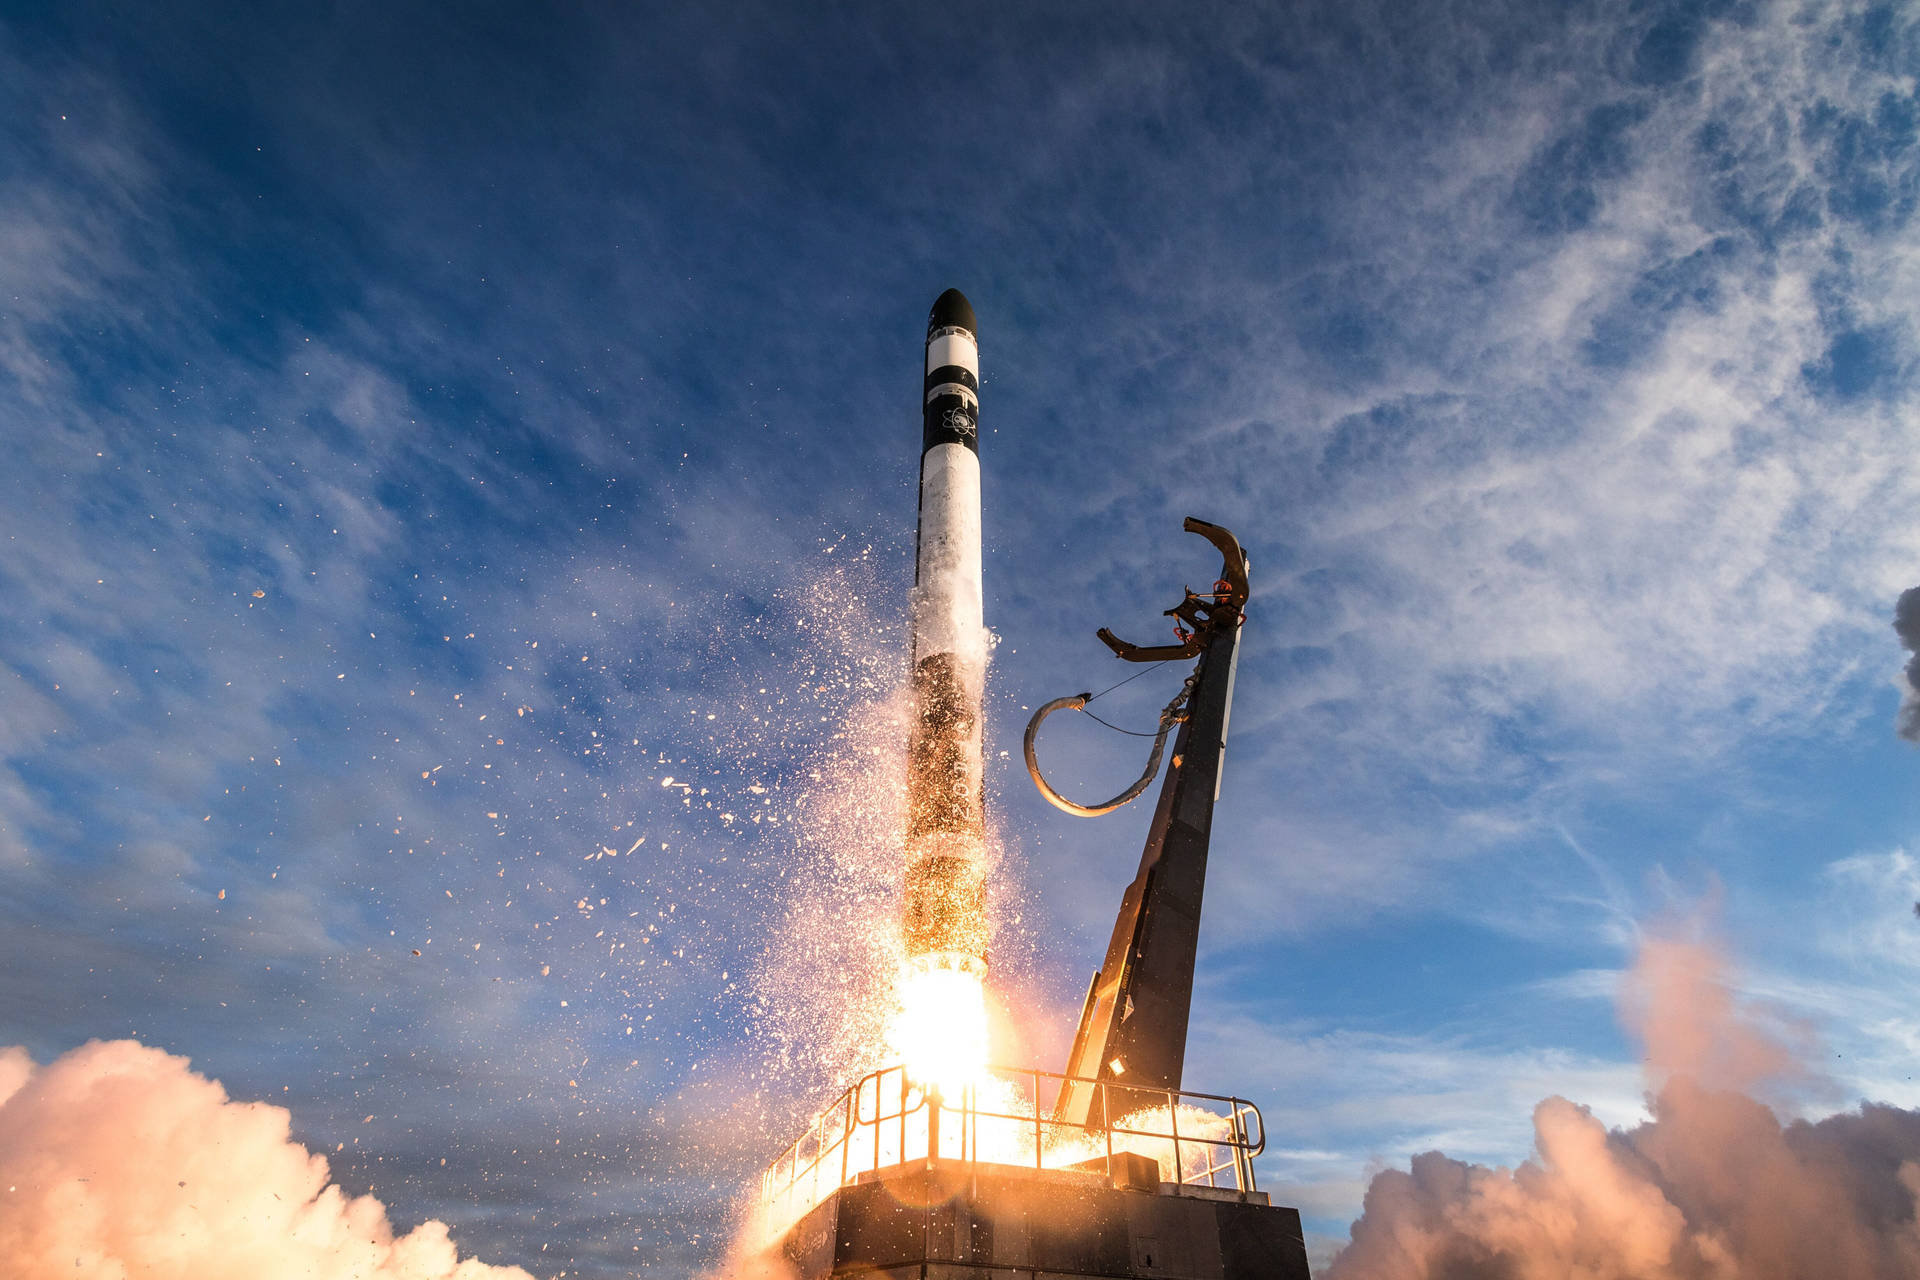 Rocket 4925X3284 Wallpaper and Background Image